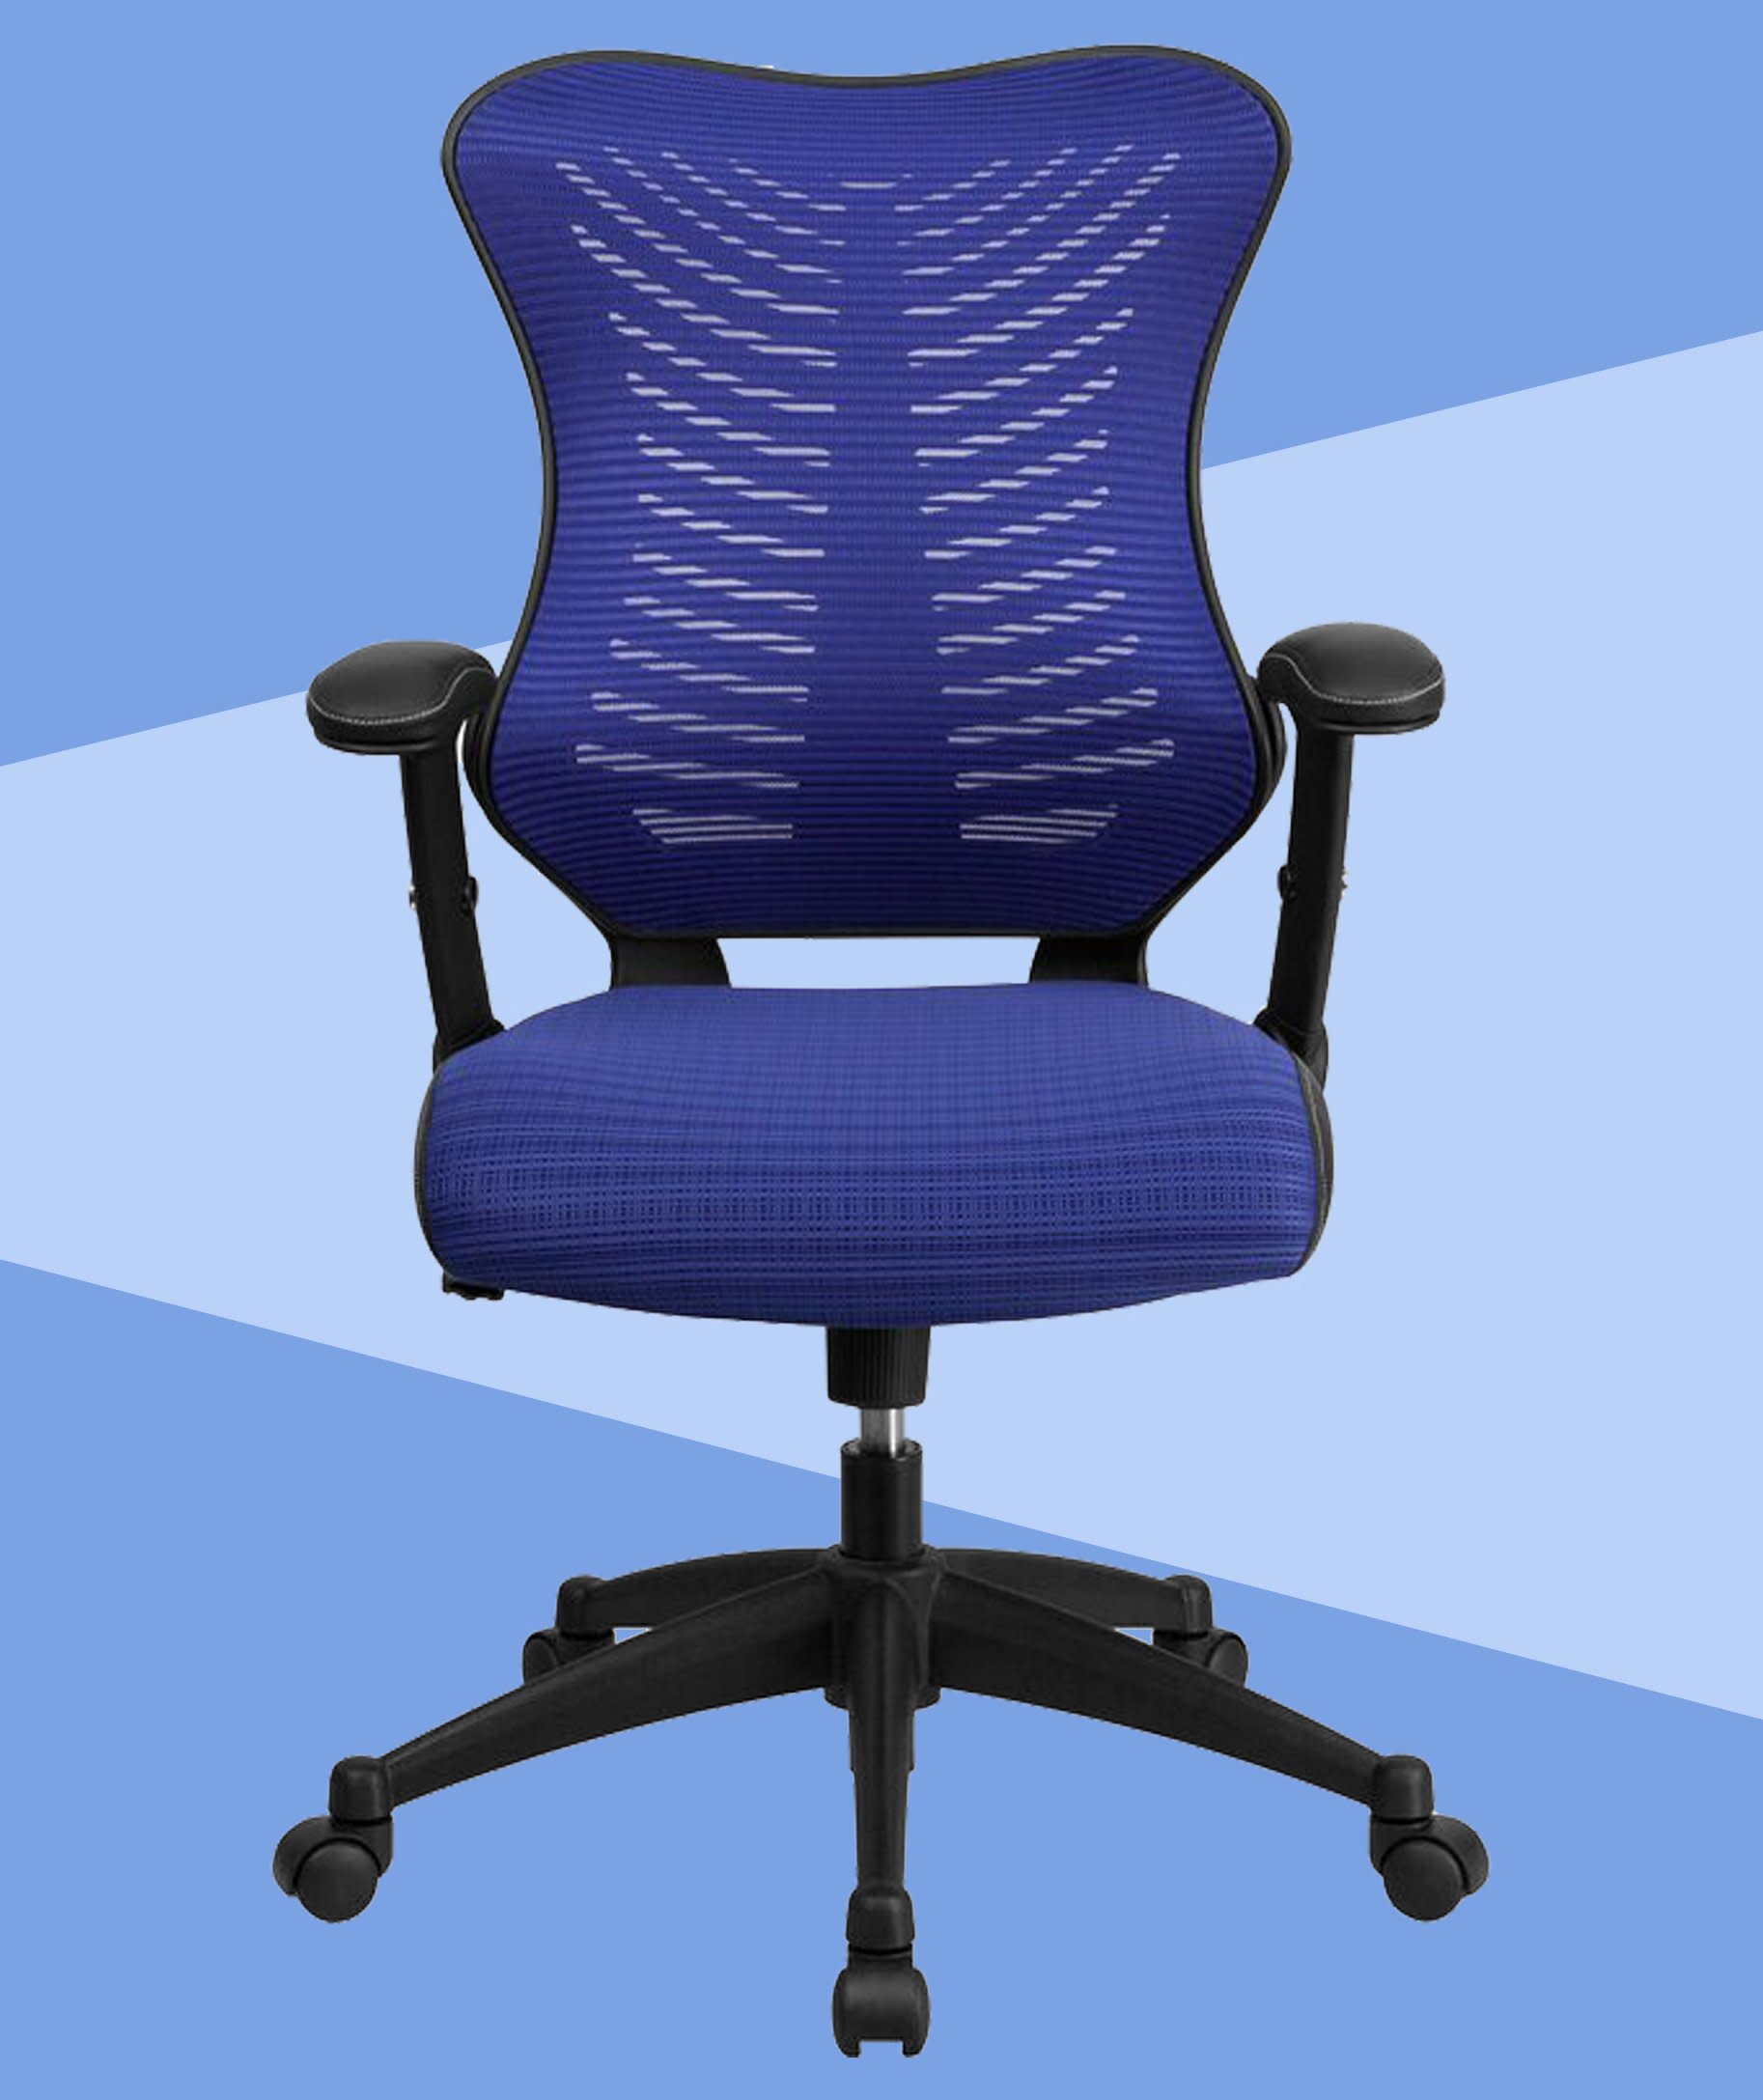 The 7 Most Comfortable Home Office Chairs, According to Thousands of